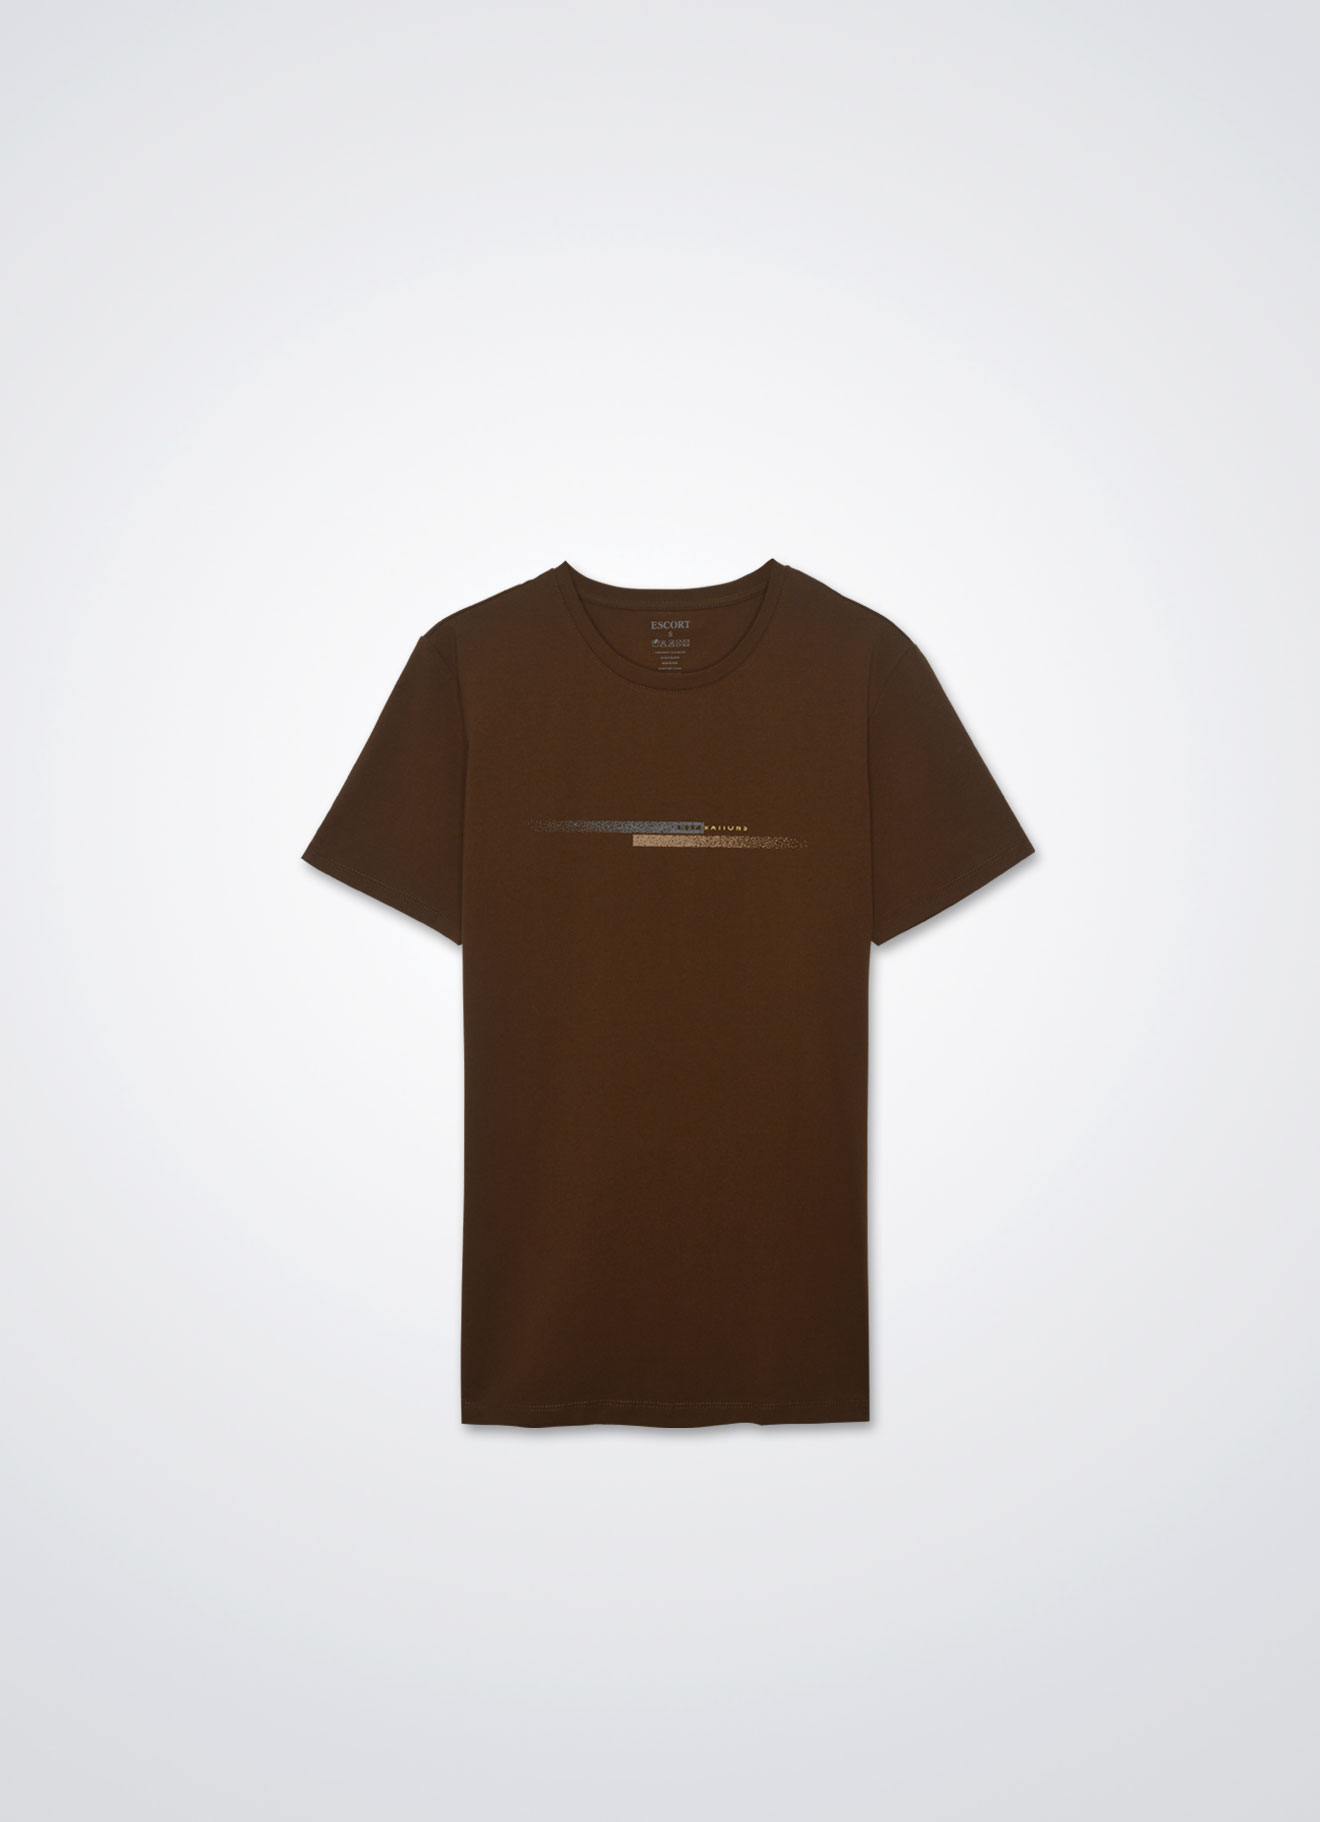 Tortoise-Shell by Couple T-Shirt